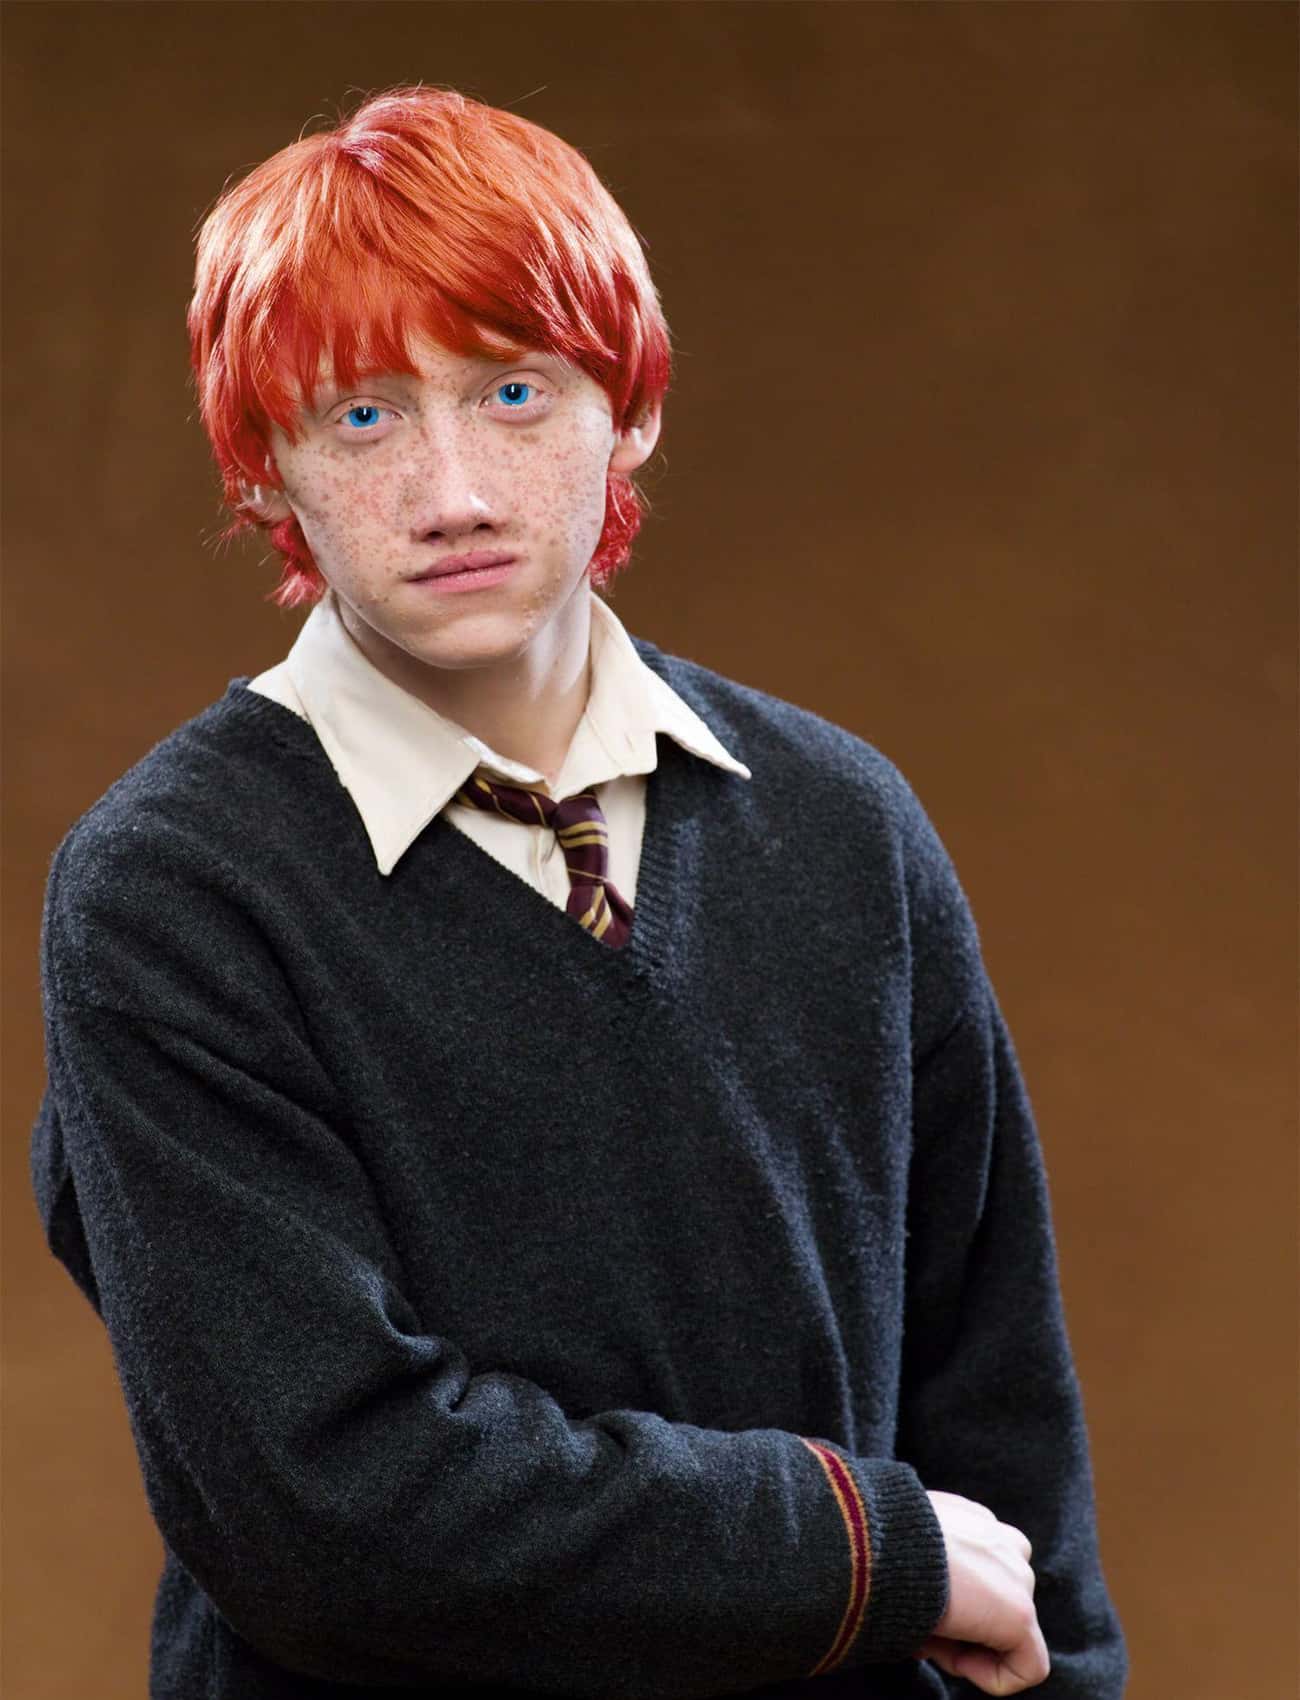 Ron Weasley In The Books: Freckled Gangly Surfer Dude